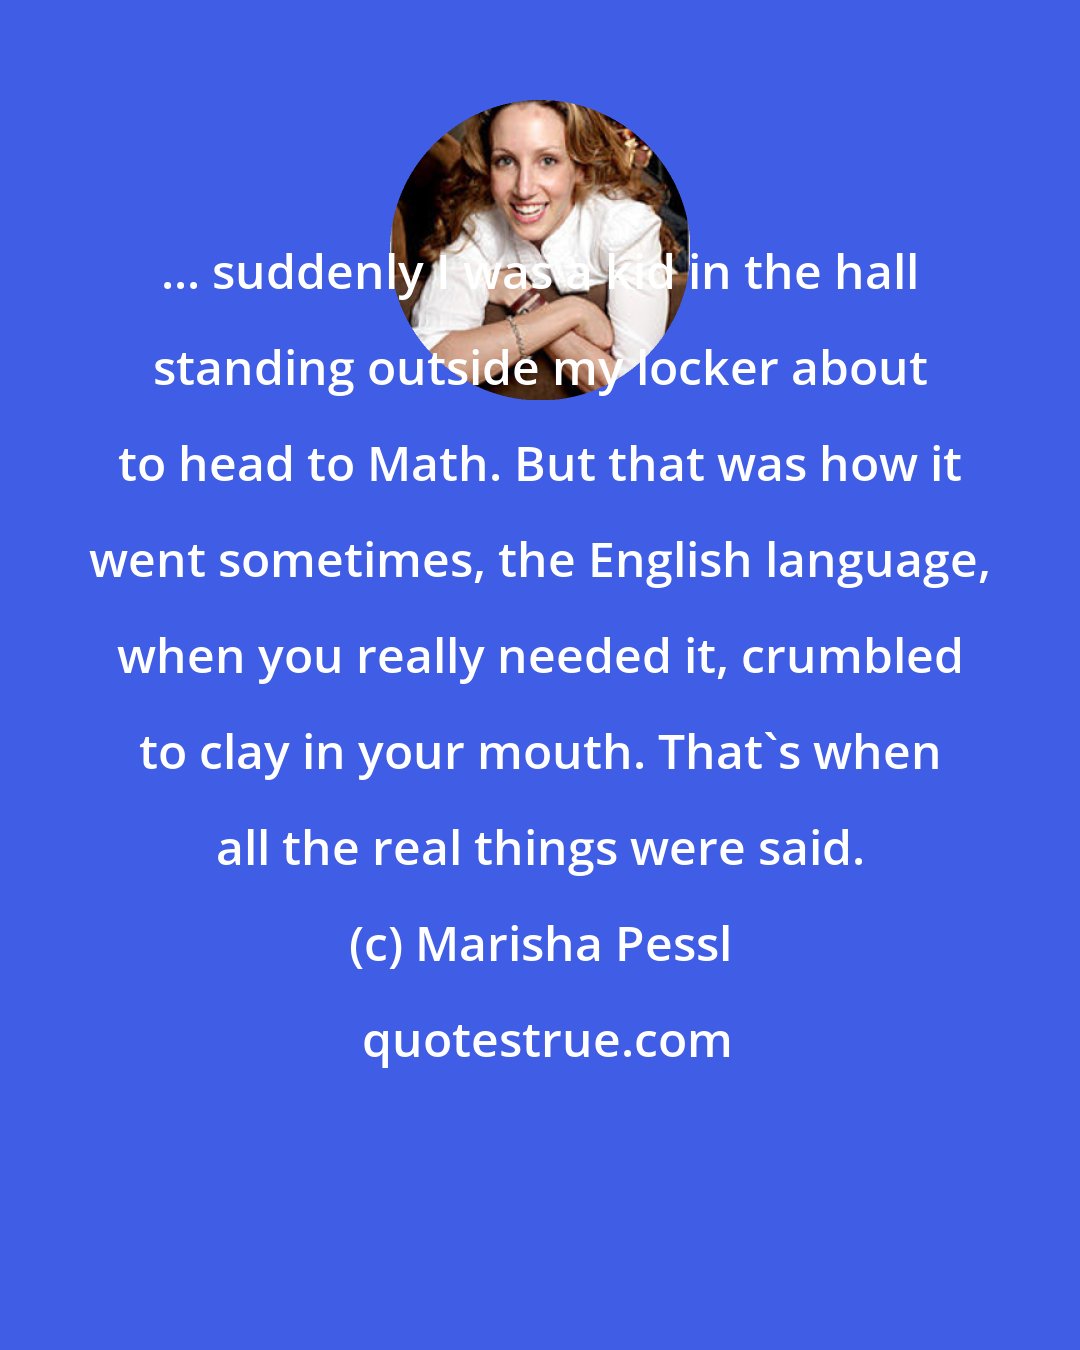 Marisha Pessl: ... suddenly I was a kid in the hall standing outside my locker about to head to Math. But that was how it went sometimes, the English language, when you really needed it, crumbled to clay in your mouth. That's when all the real things were said.